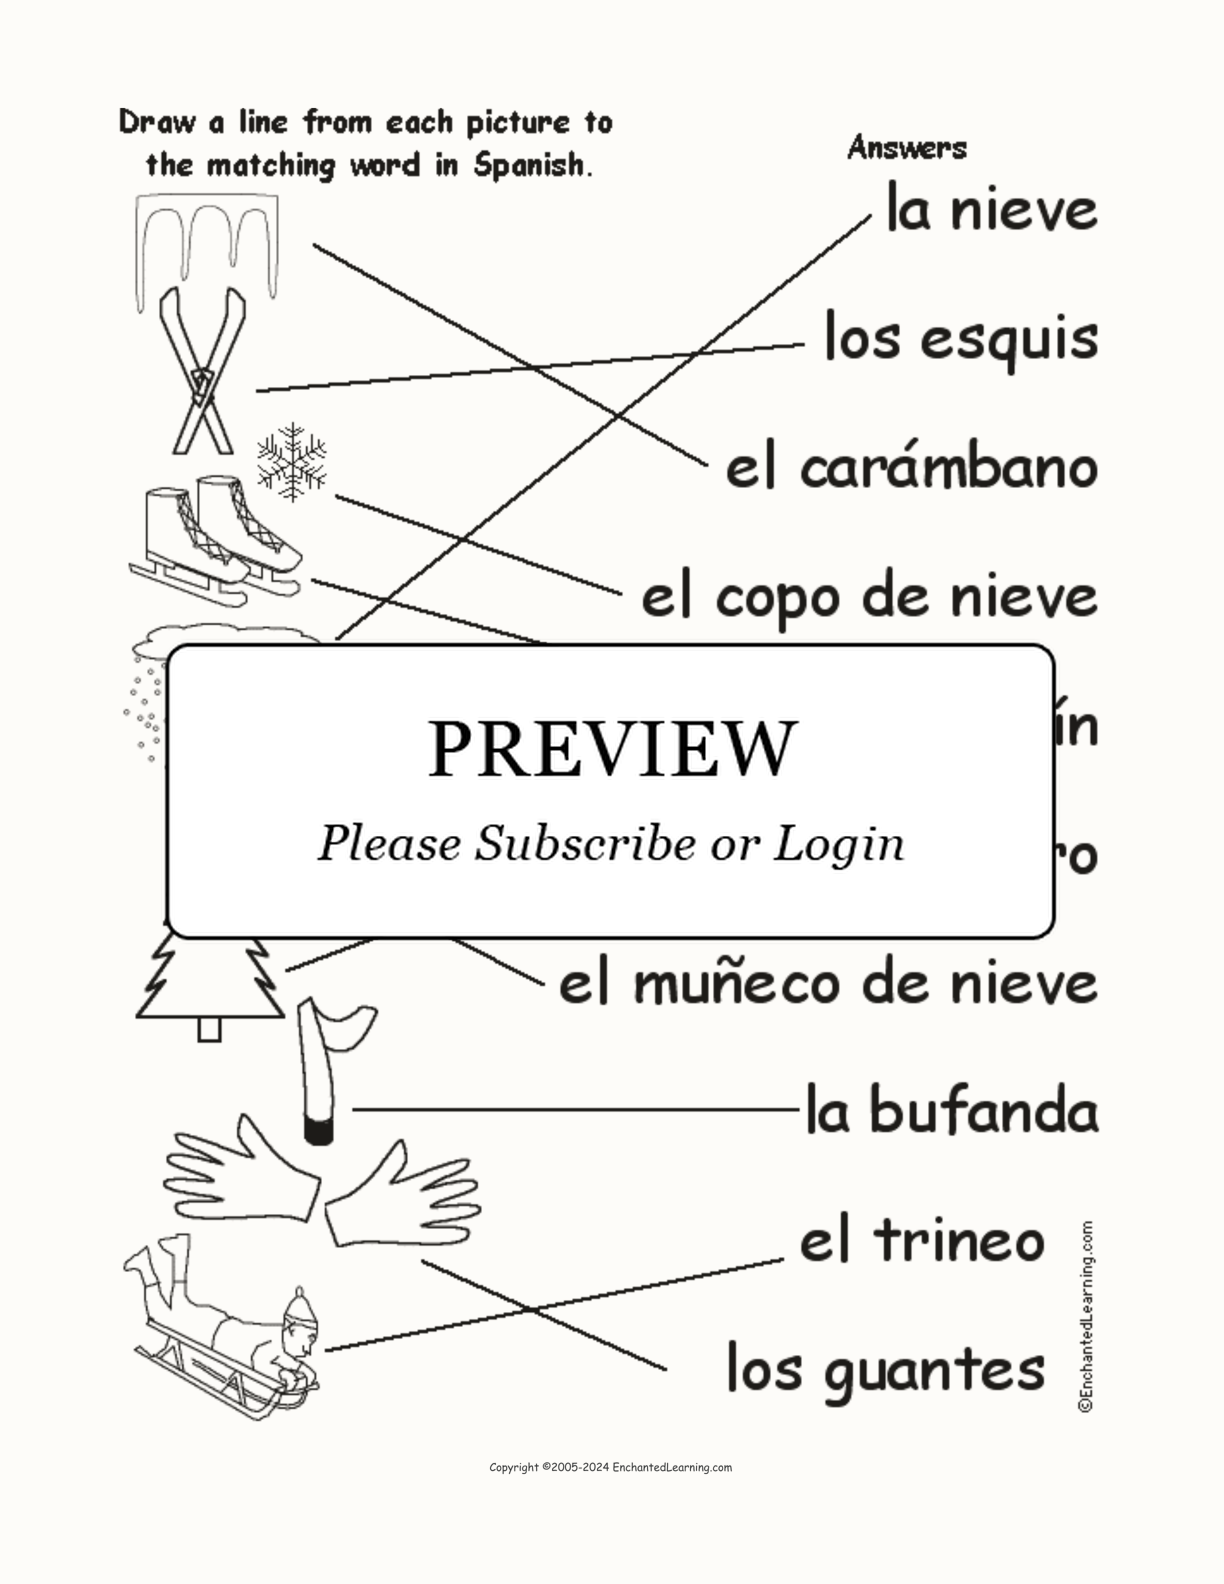 Match the Spanish Winter Words to the Pictures interactive worksheet page 2